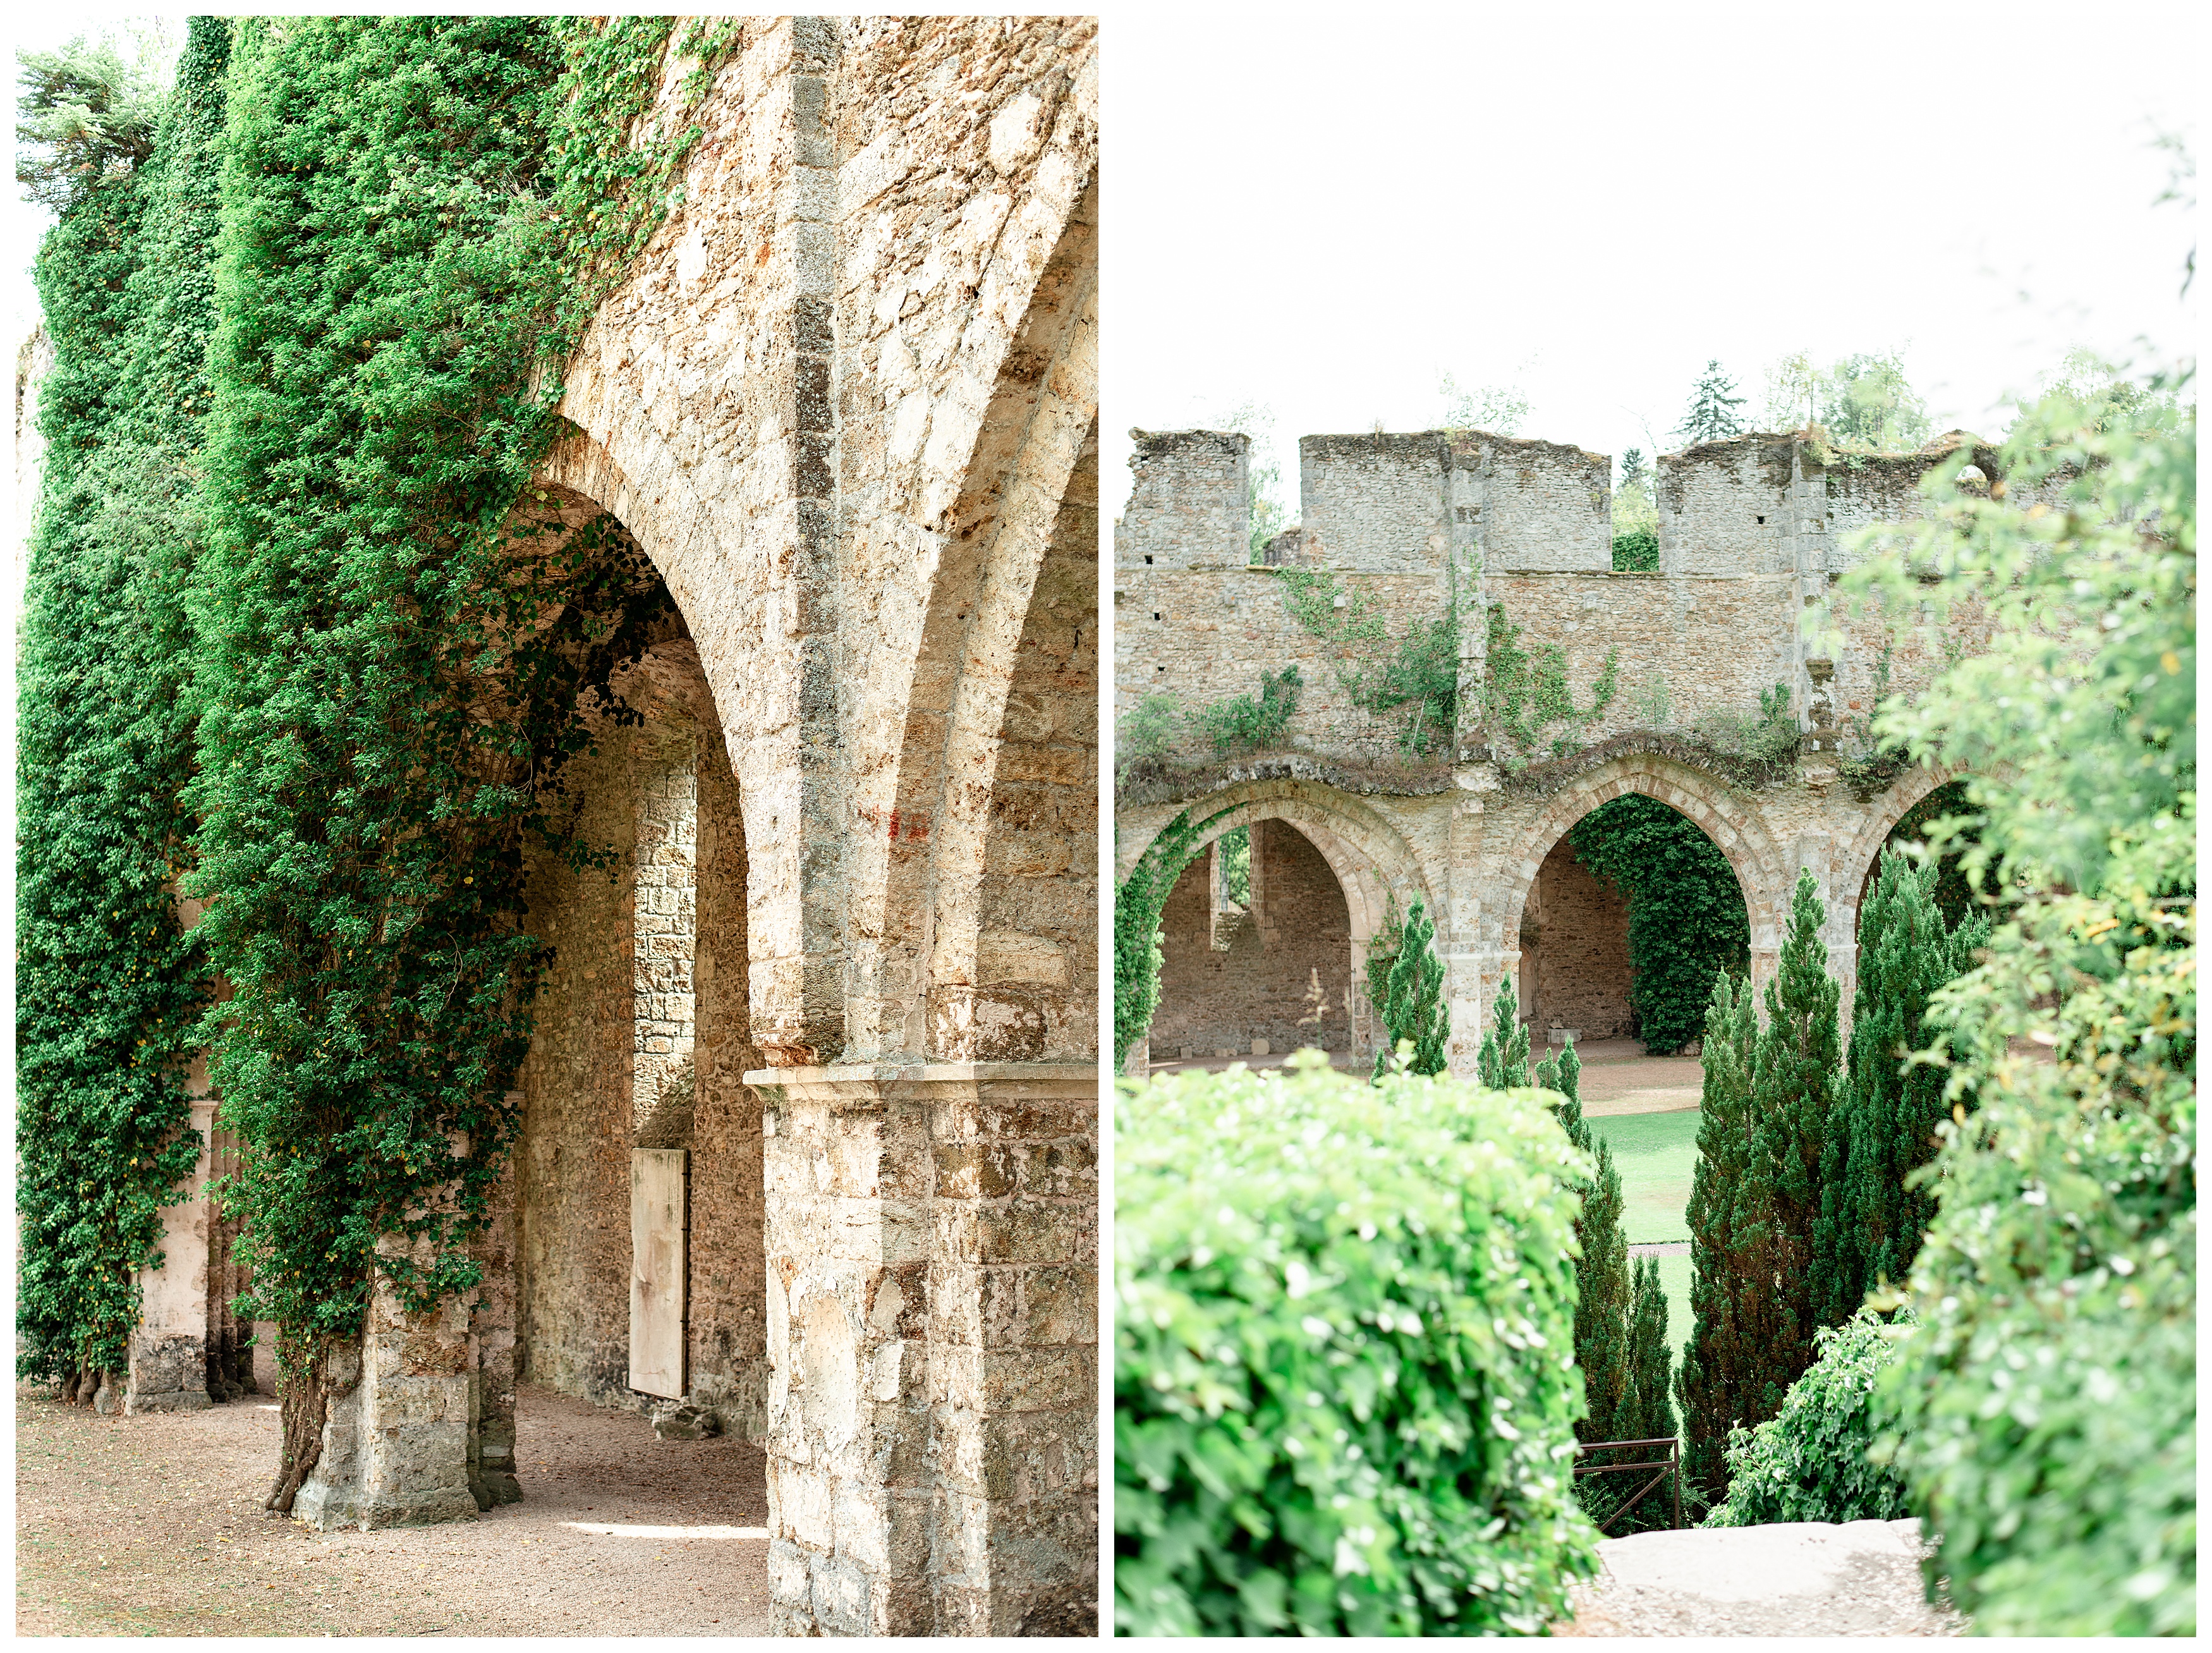 the ancient ruins of the abbaye des vaux de cernay are now overrun with vines, ivy, and trees